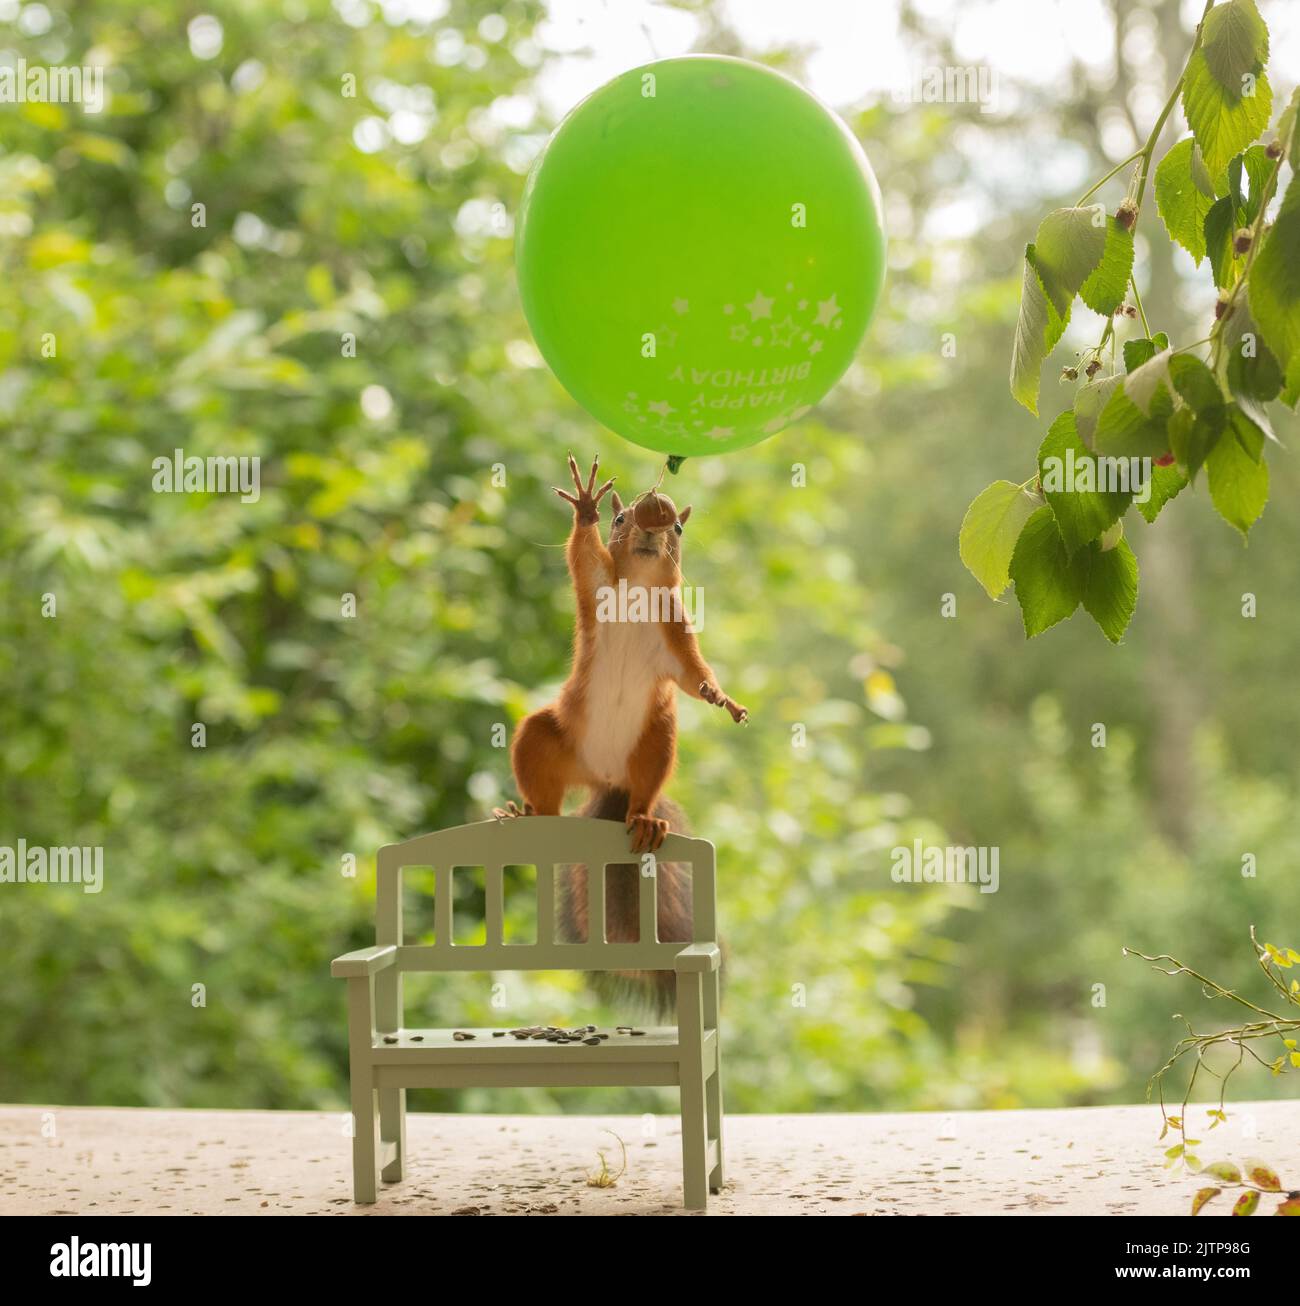 red squirrel is standing on an bench reaching a green balloon Stock Photo